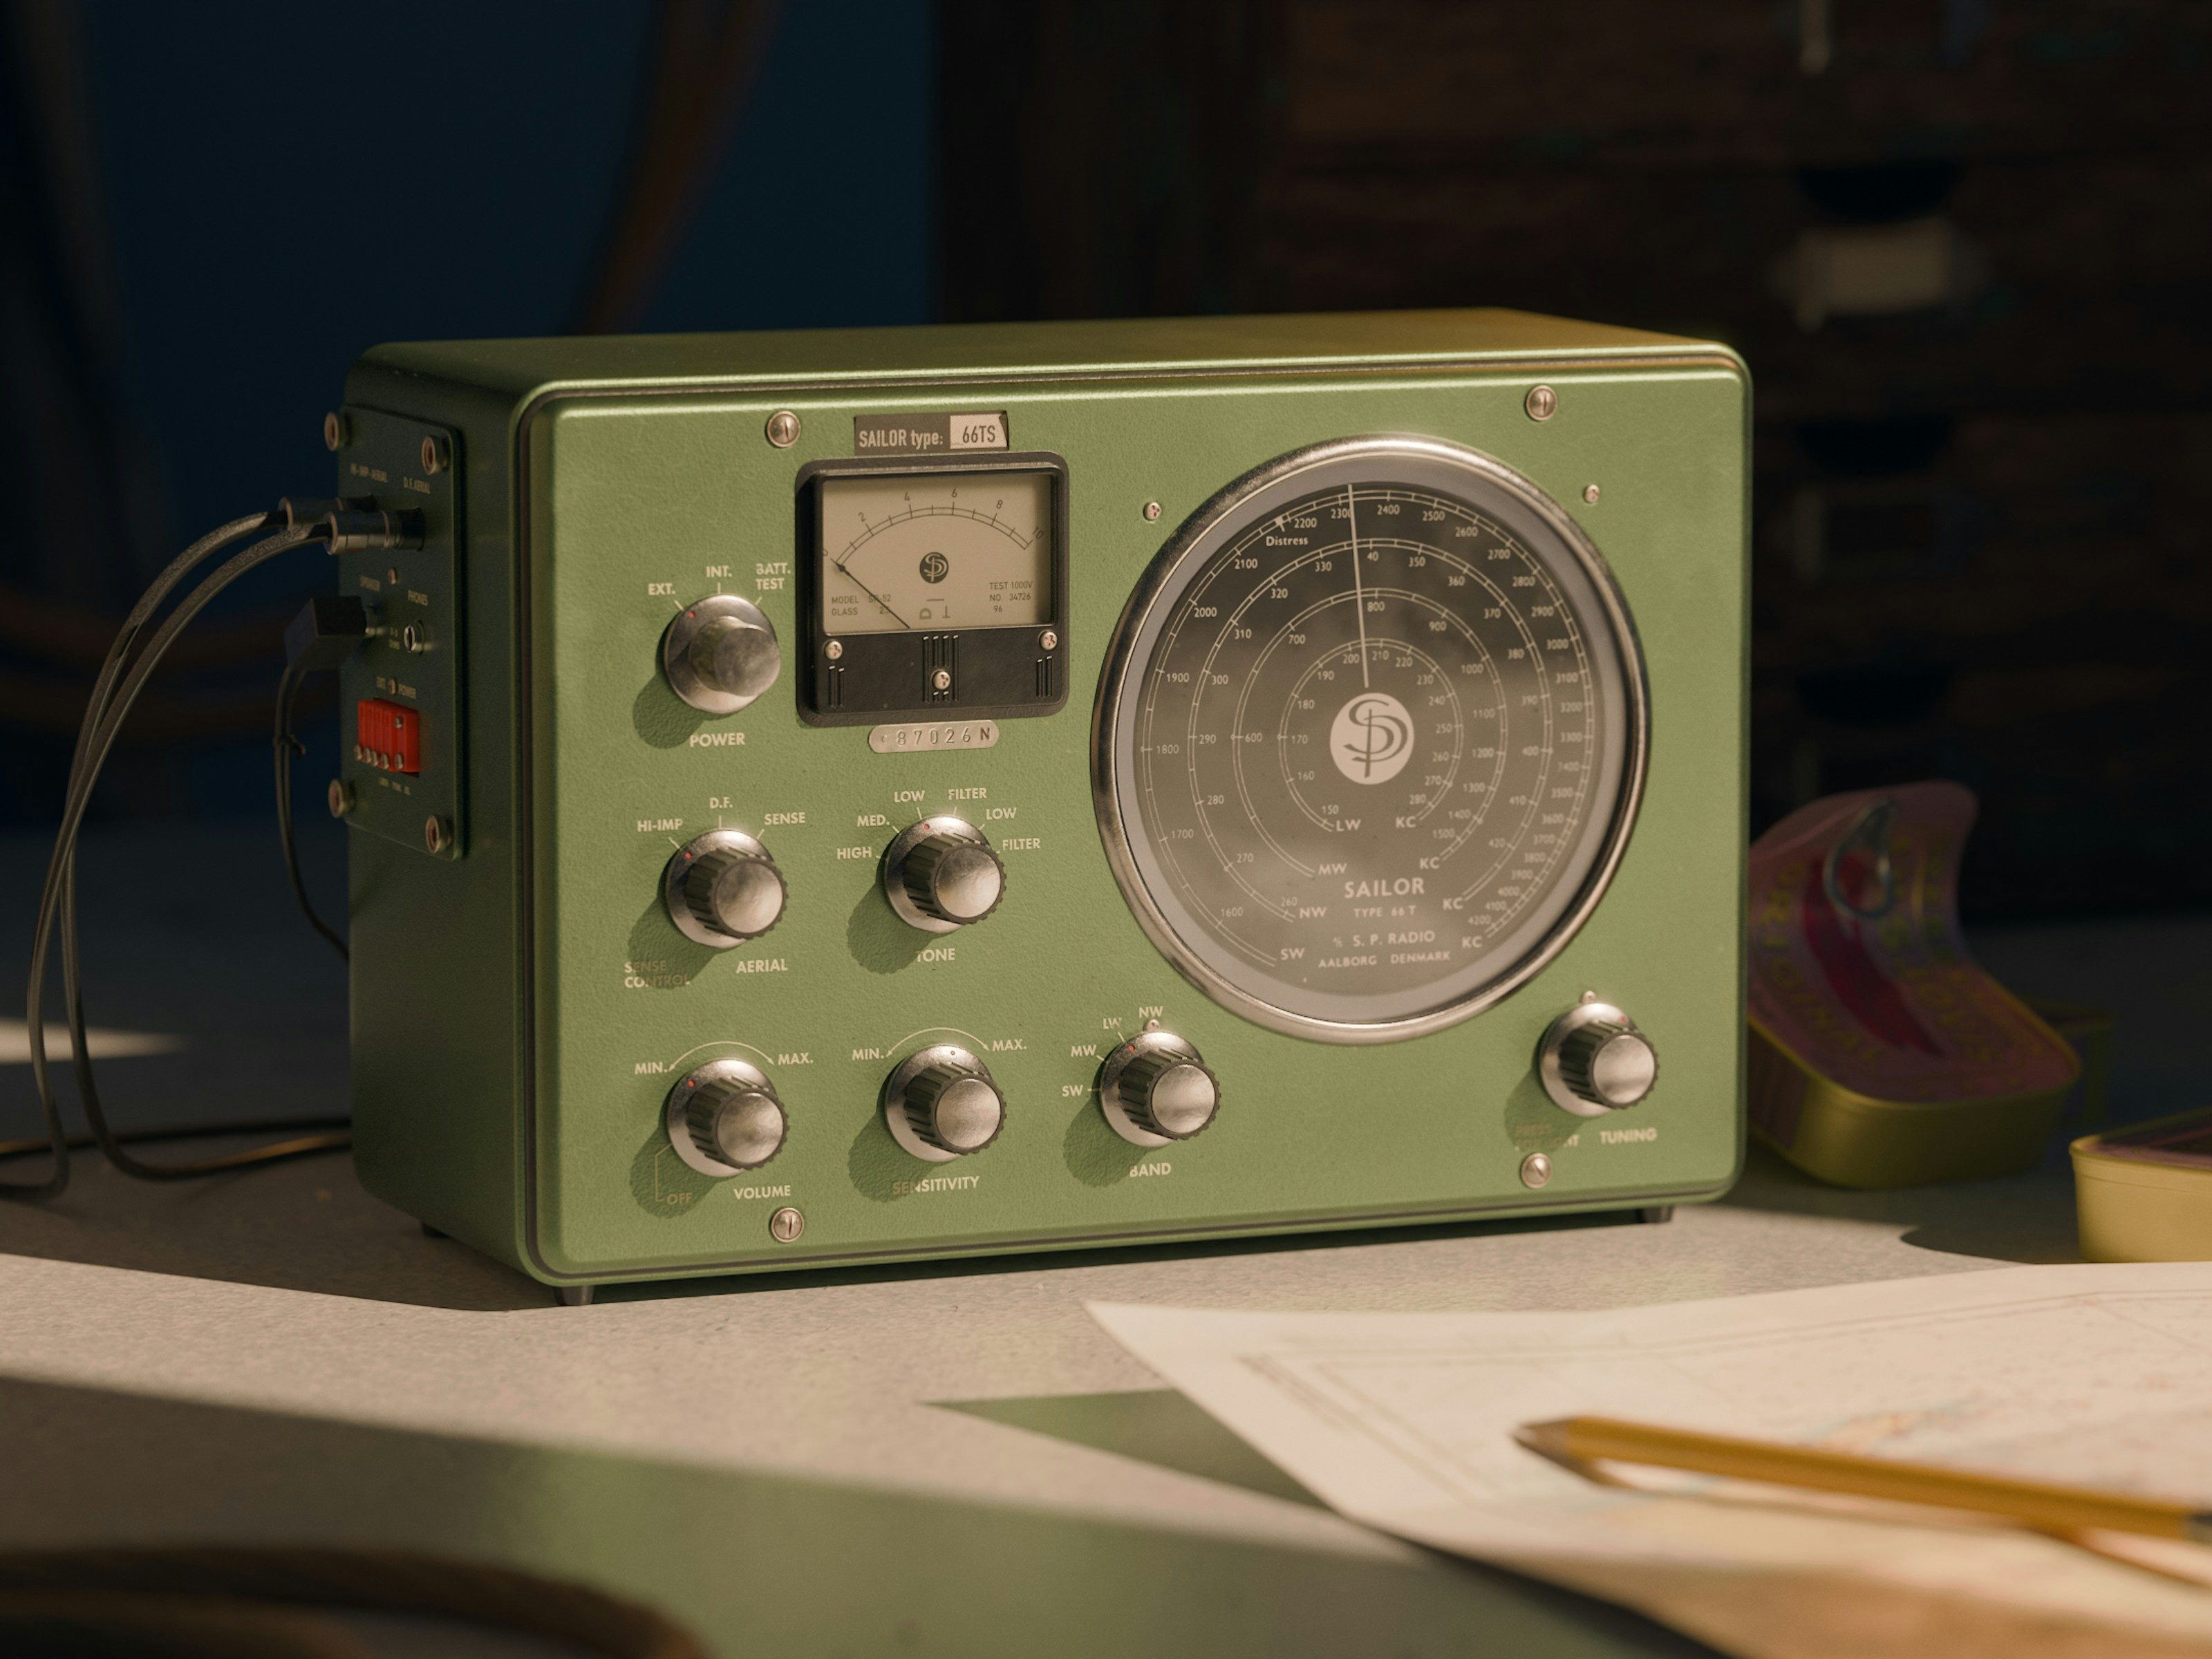 Rendering of a Sailor TS66 radio receiver.